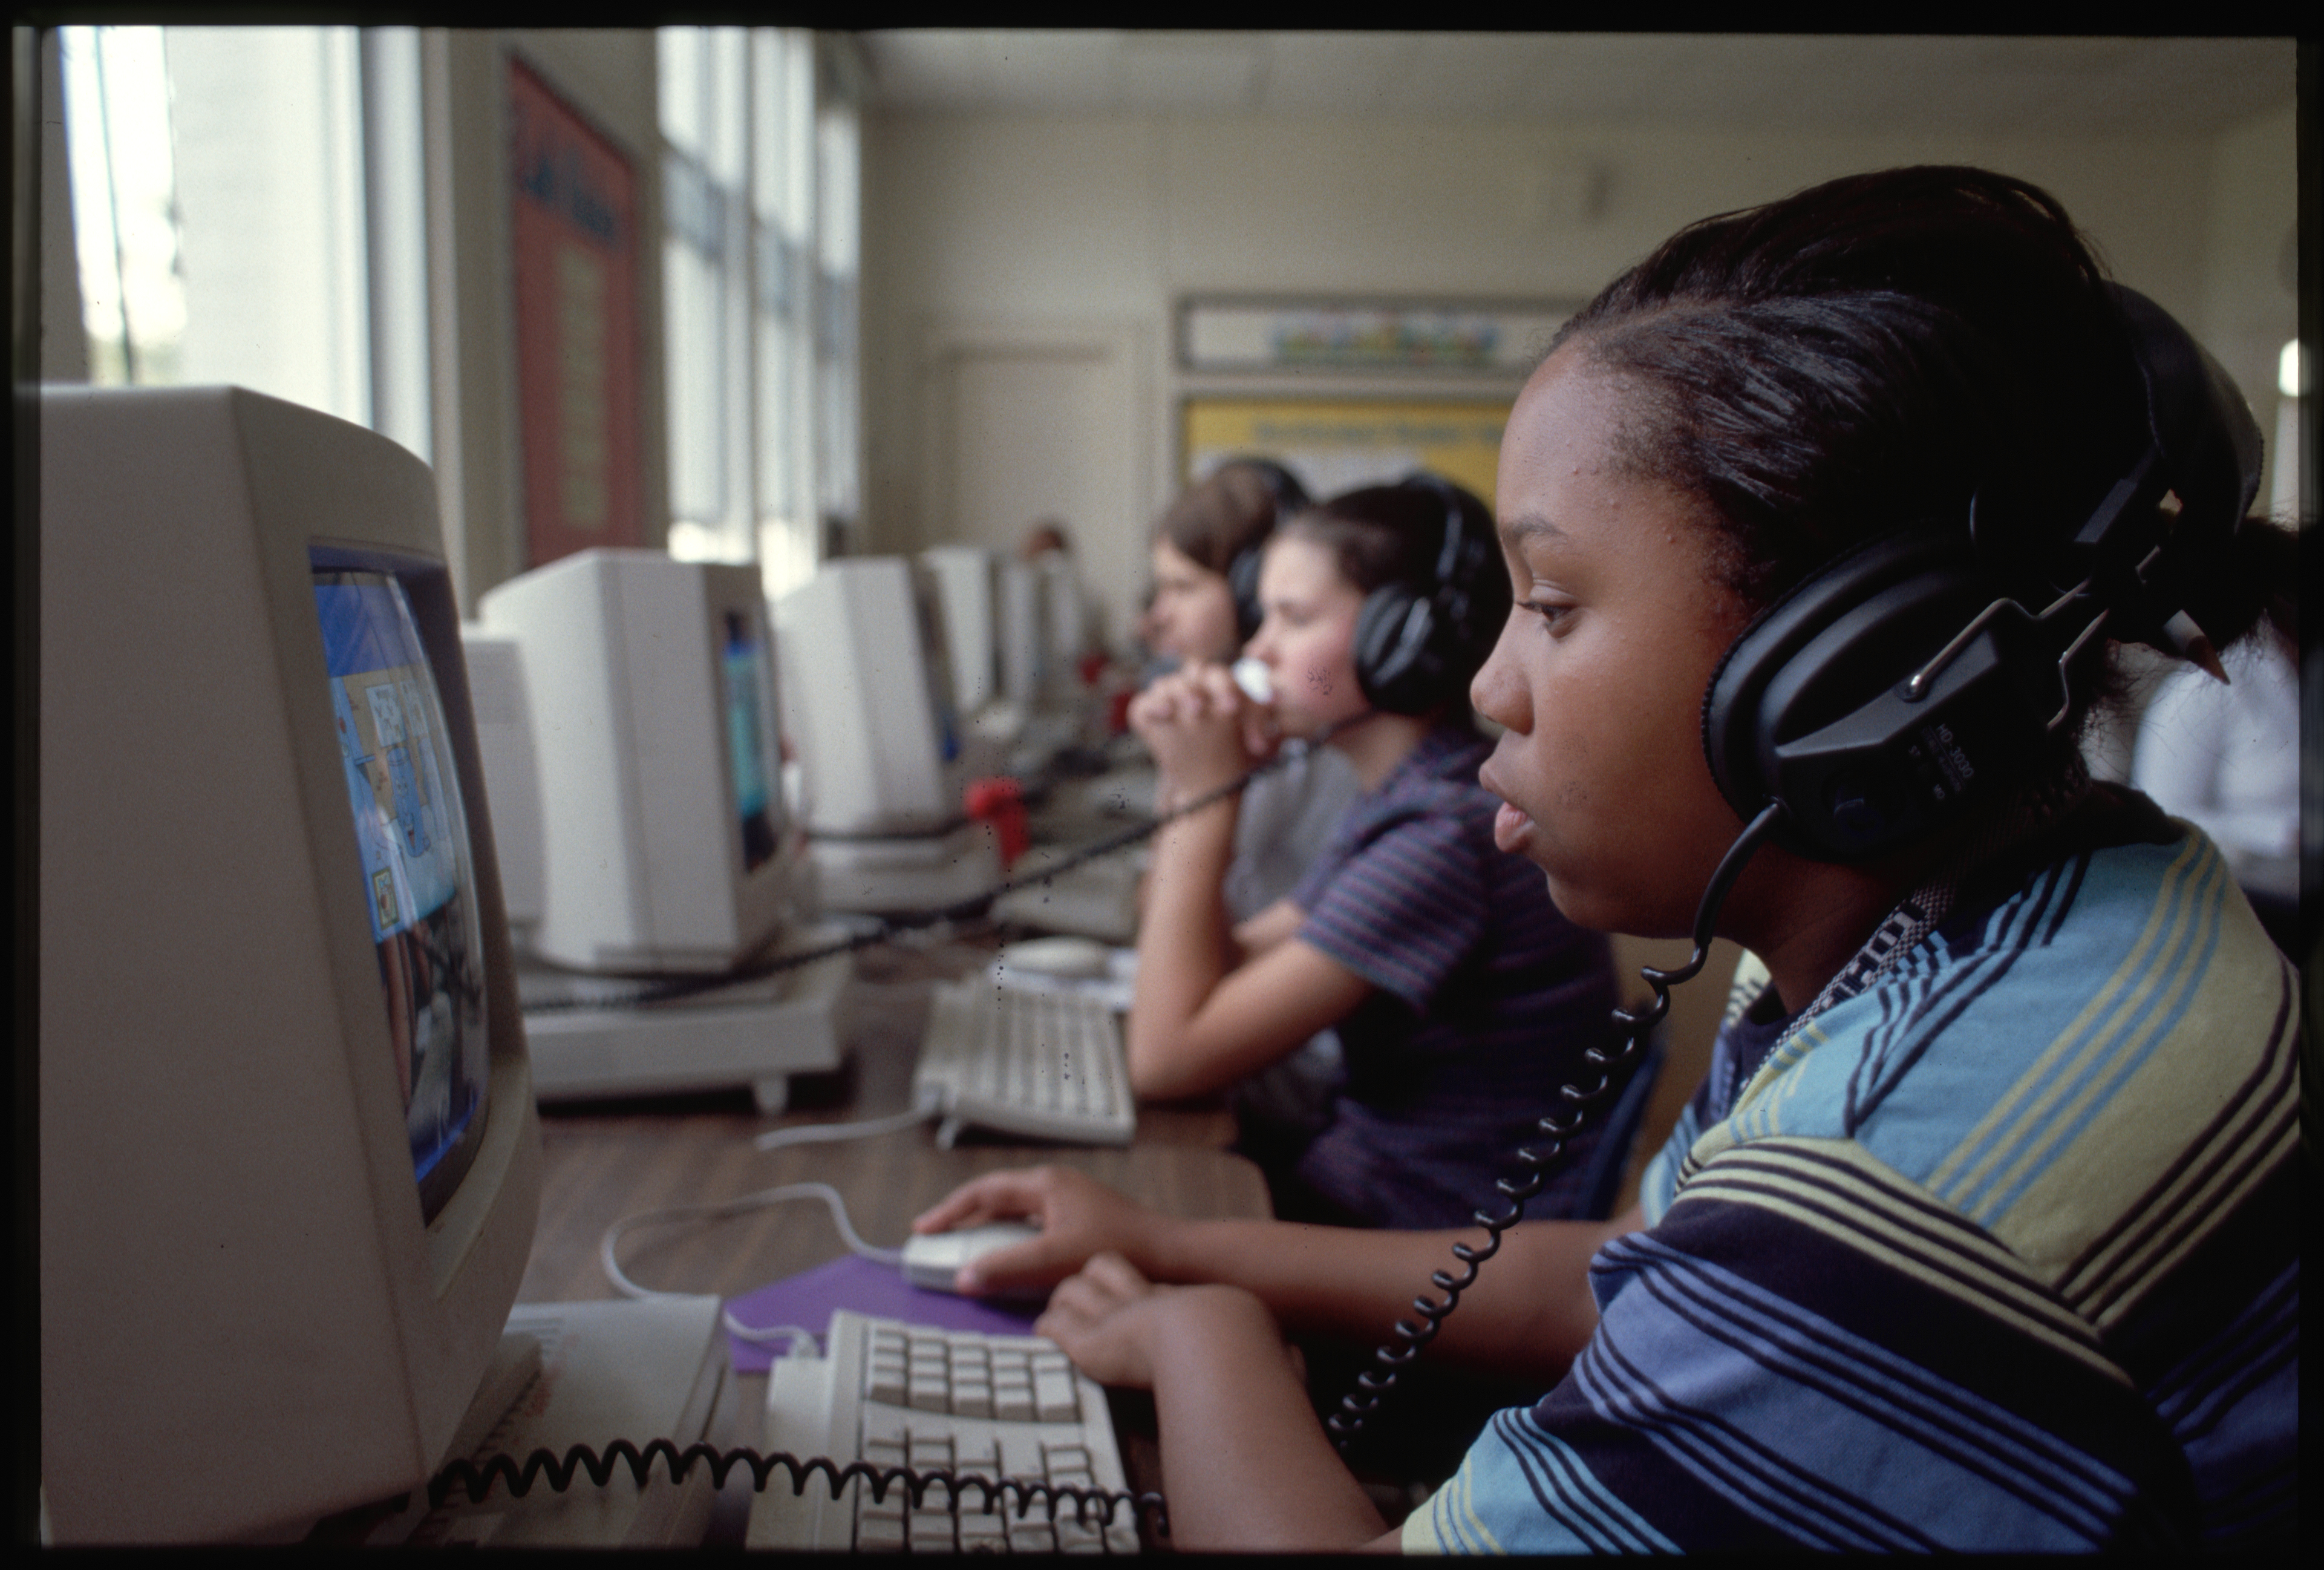 Students at computers with headphones, focusing on screens, educational setting